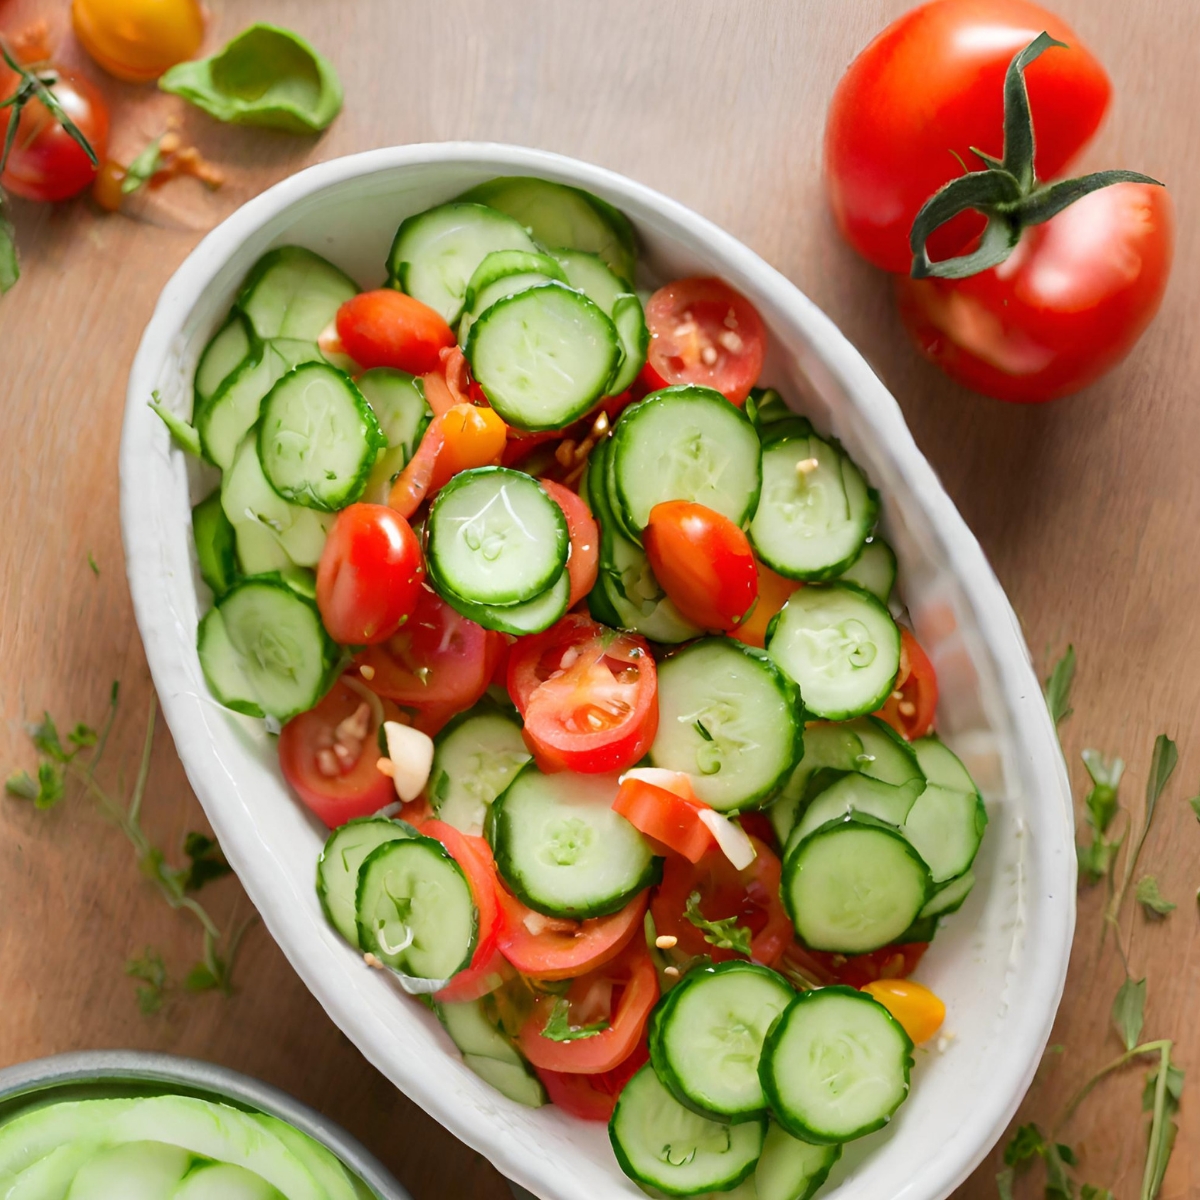 Cucumber and Tomato Salad Recipe "A Refreshing Summer Delight"